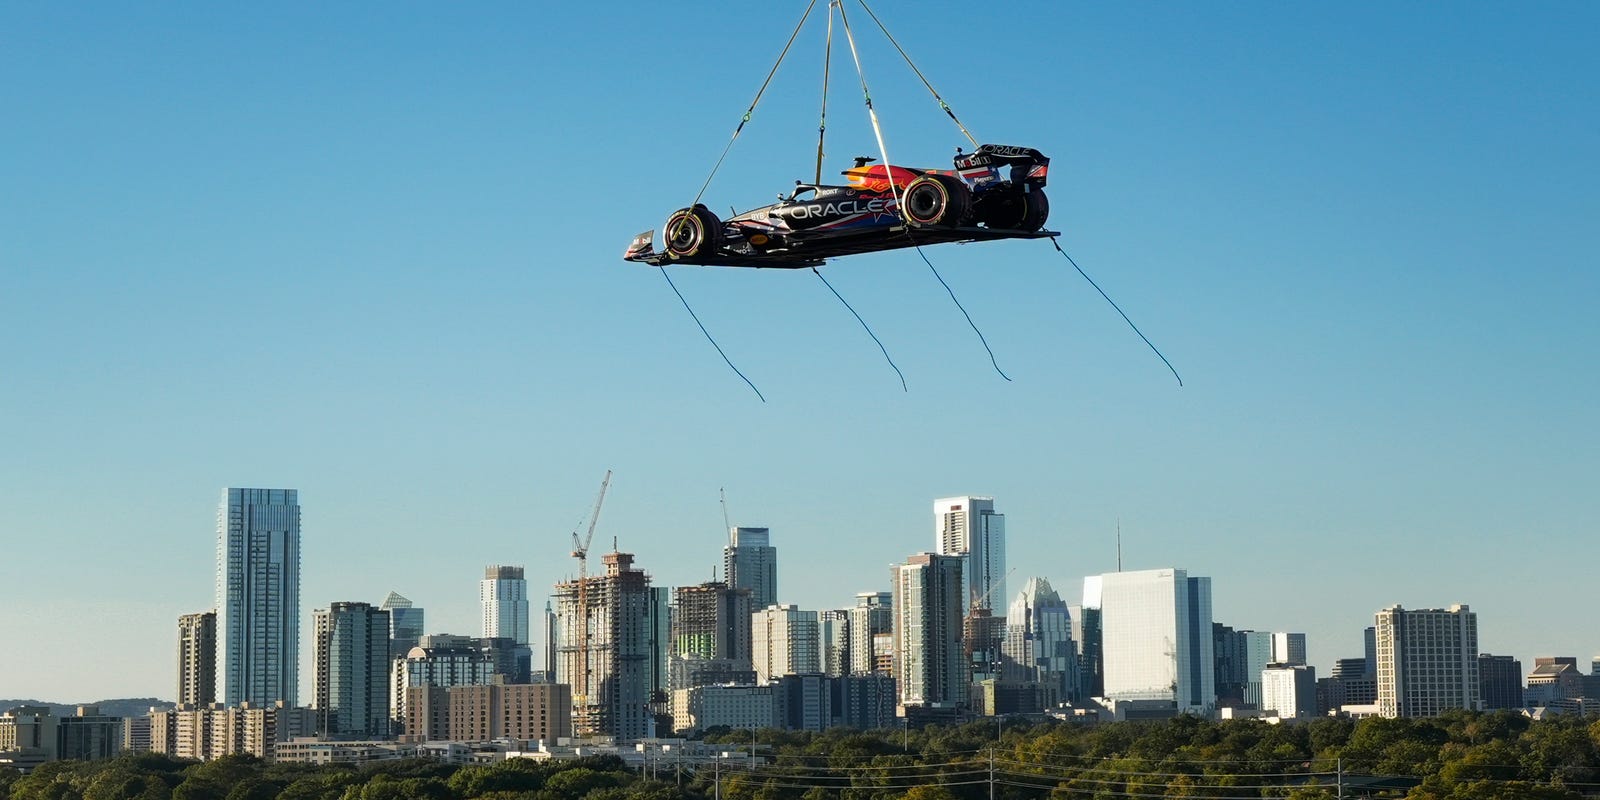 watch-as-red-bull-flies-new-f1-car-across-downtown-austin-via-helicopter